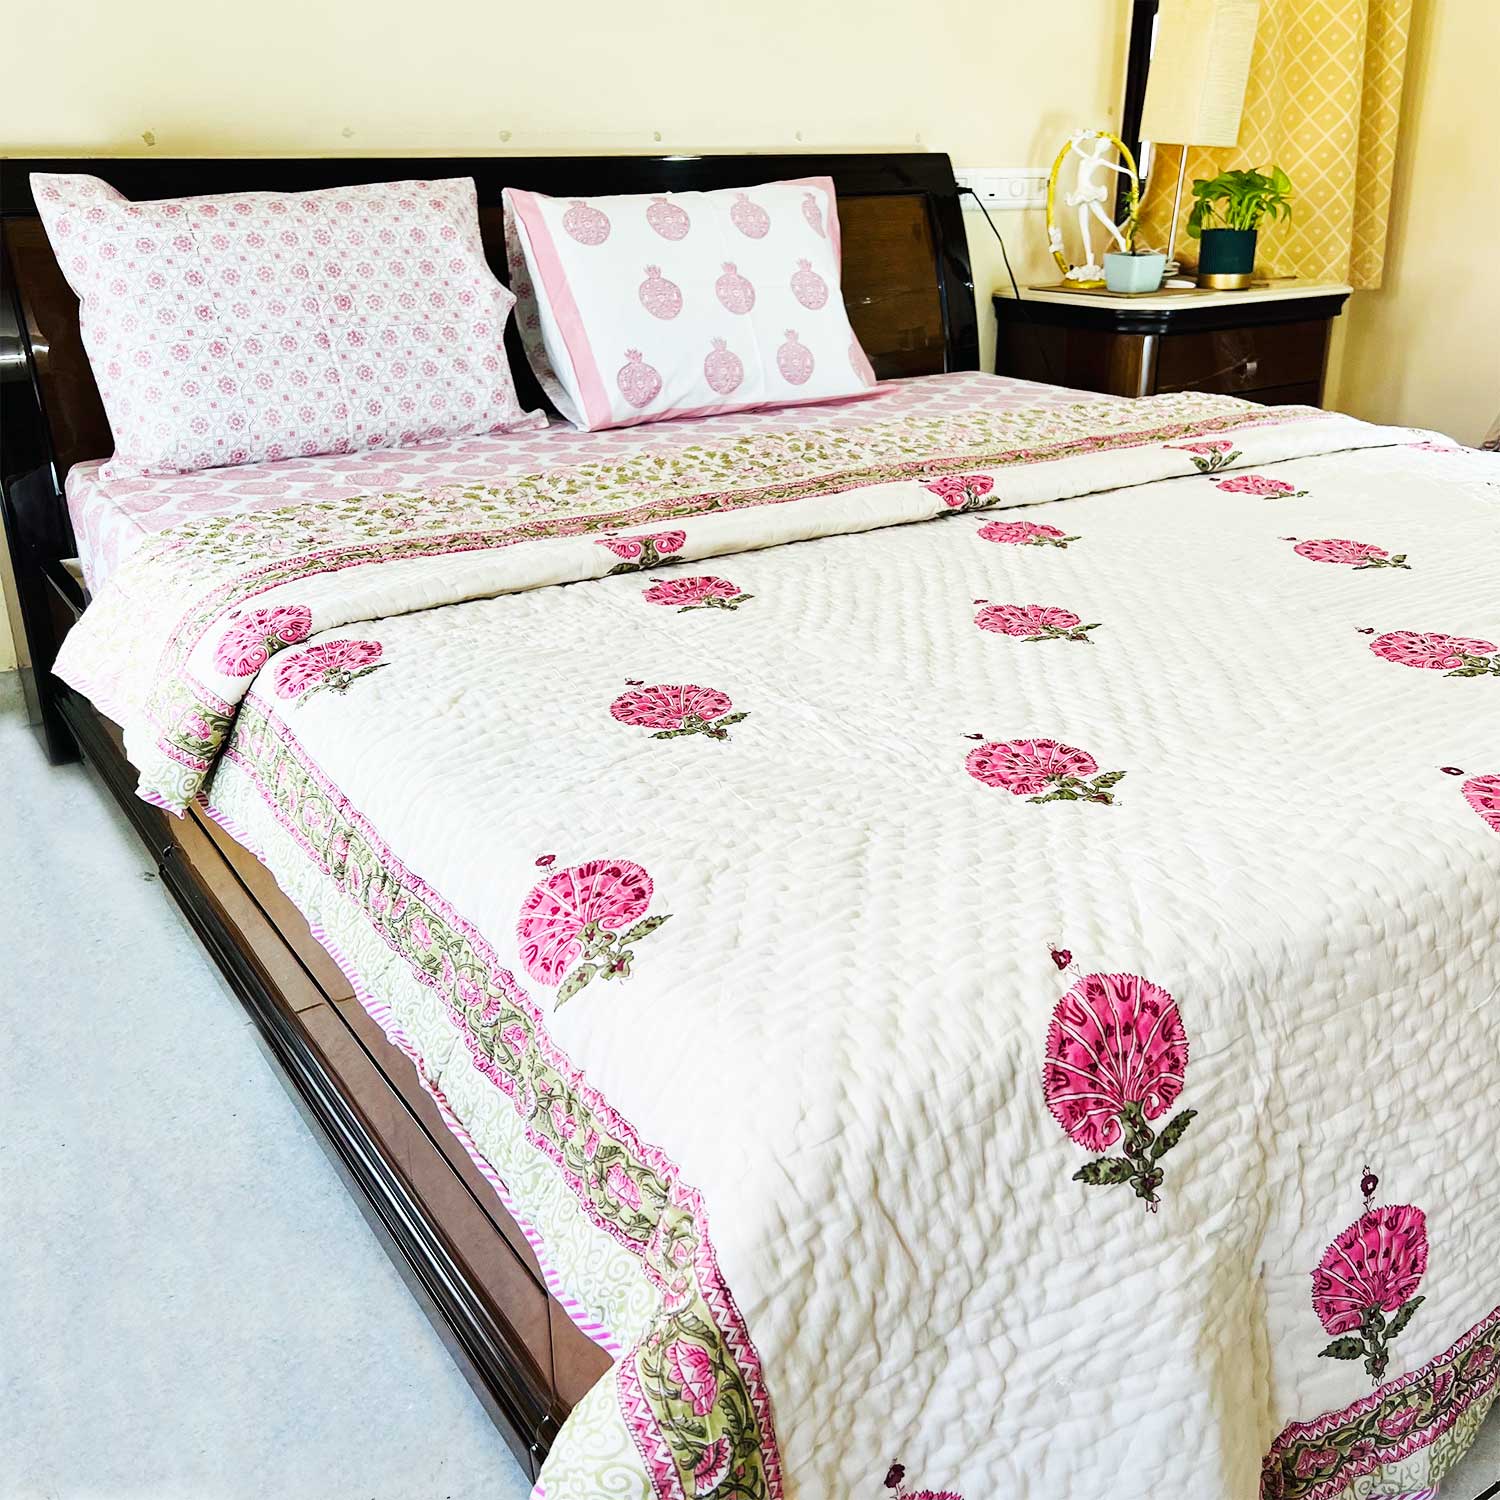 Pink Motif Block Printed Double sided Cotton Quilt - 90 inches x 108 inches